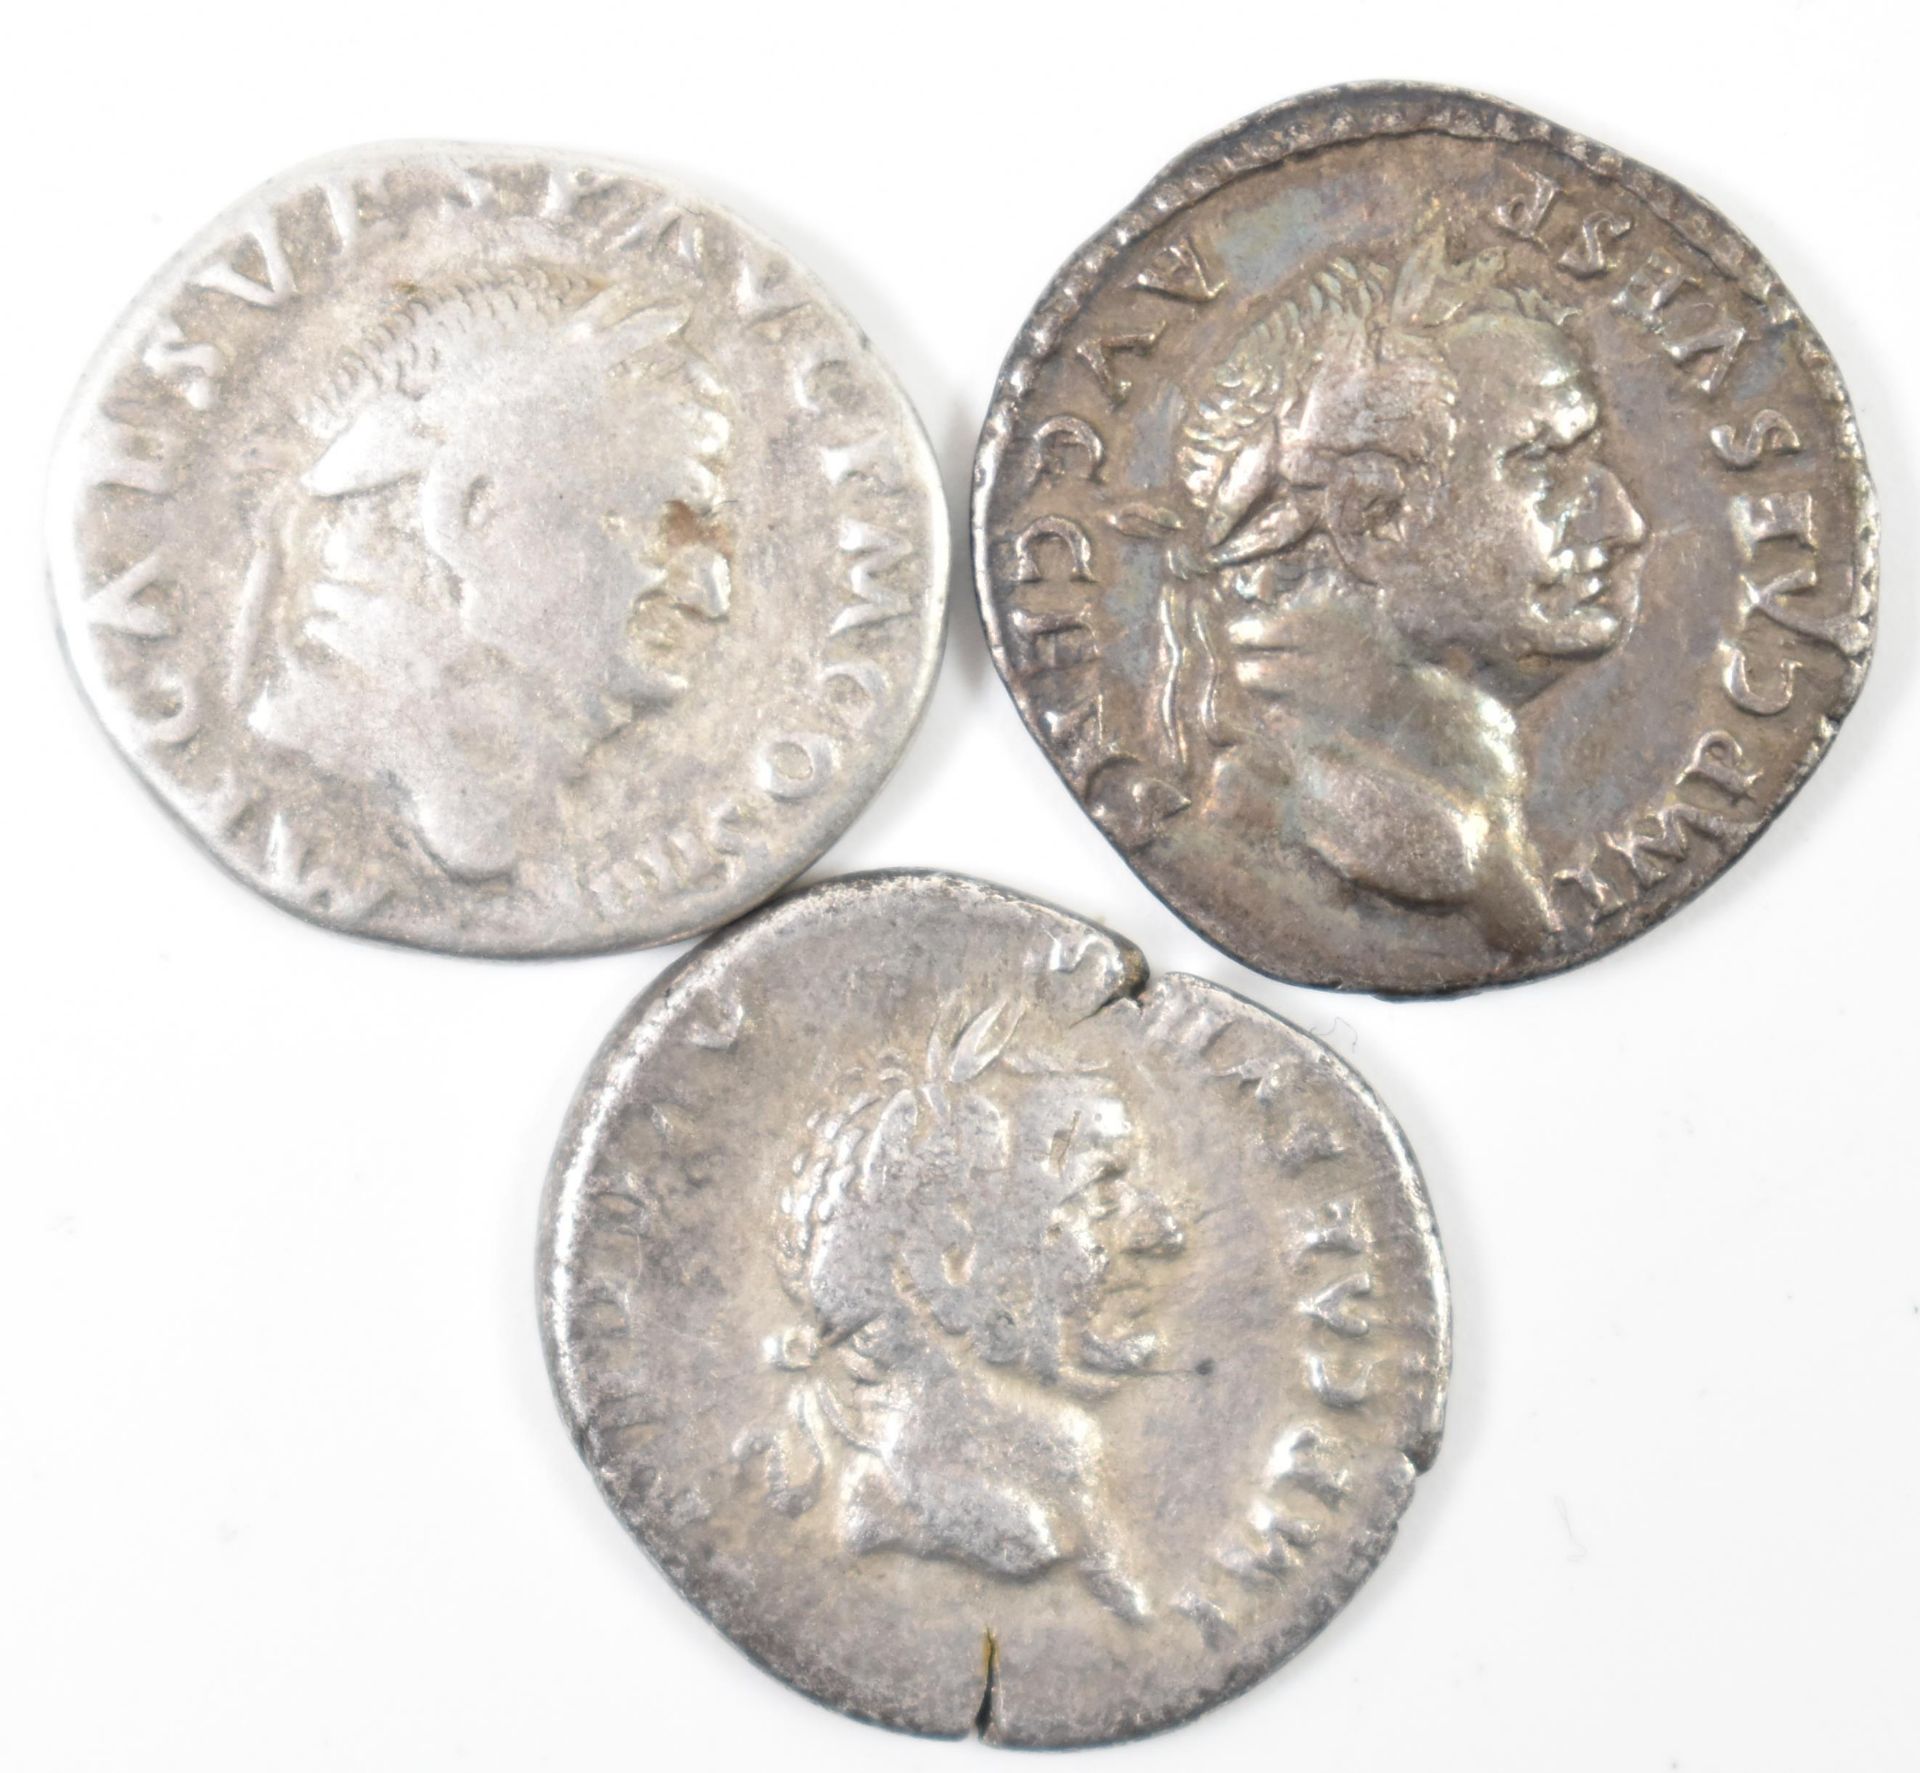 COLLECTION OF THREE SILVER DENARIUS FROM THE REIGN OF VESPASIAN